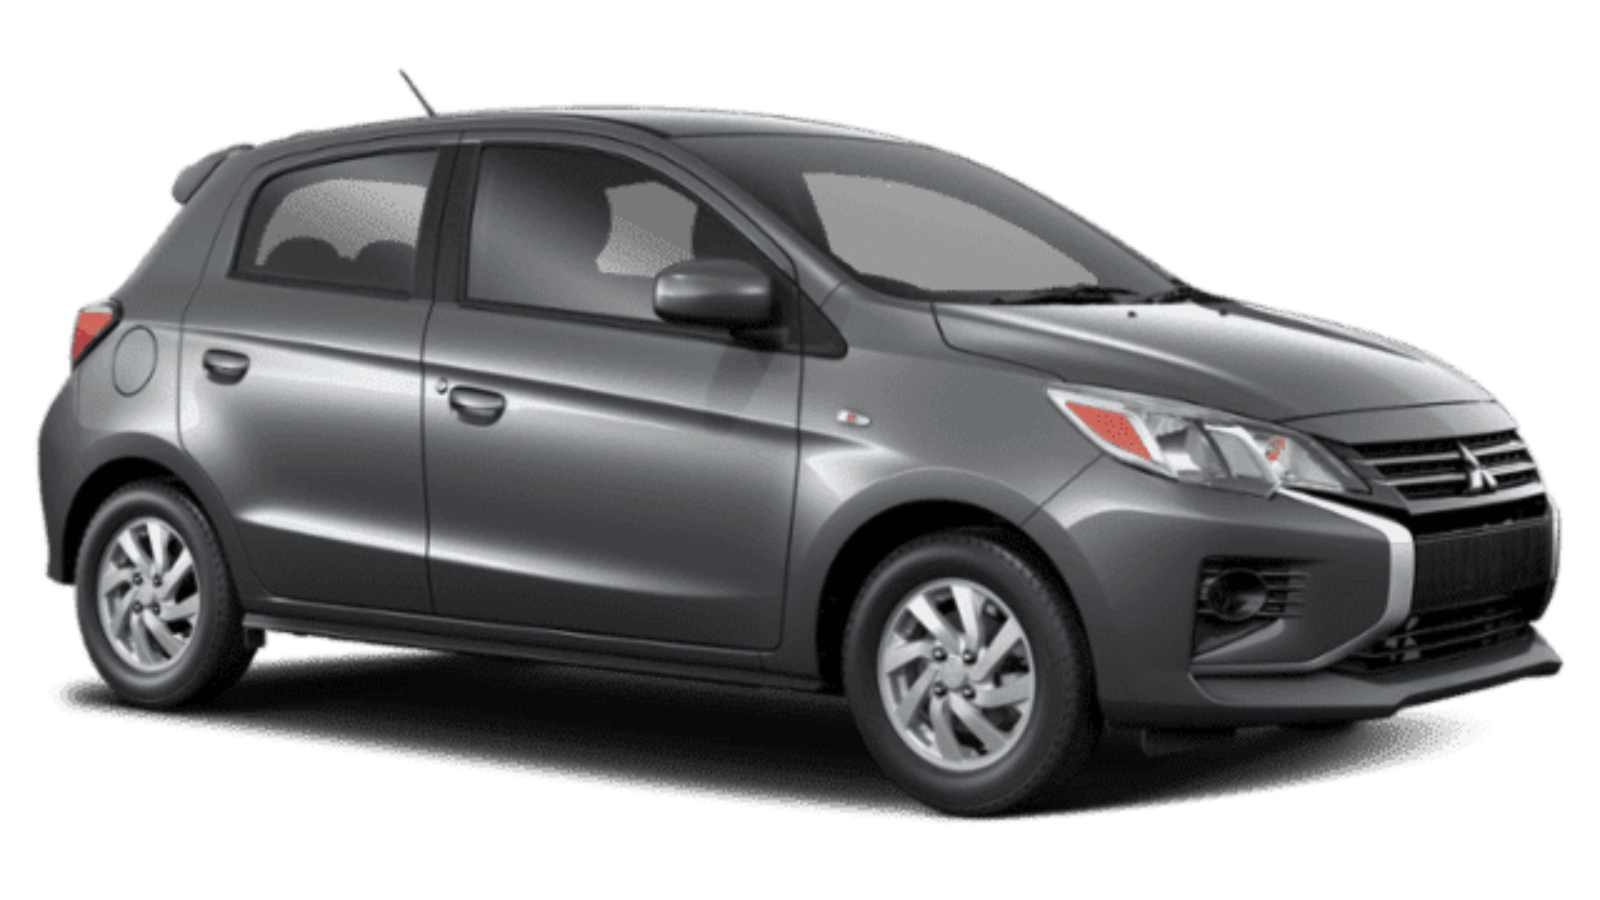 <p><strong>Price:</strong>$18,160 (including $1,145 destination)</p> <p><strong>Combined fuel economy:</strong>39 mpg</p> <p>The Mirage is a subcompact hatchback with seating for up to five. The small1.2-liter three-cylinder engine and optional continuously variable automatic gearbox’s EPA-estimated combined gas consumption is an impressive 39 mpg, but the Mirage’s performance suffers as a result; it is lethargic. However, during our last assessment, we found driving rather enjoyable.</p> <p>The 7-inch touchscreen infotainment system and automated emergency braking with pedestrian recognition are two of the Mirage’s notable standard features. Additional standard equipment for the 2024 model year includes automated headlights, an armrest for the driver’s seat, and rain-sensing wipers. Mitsubishi also has a sedan version.</p>